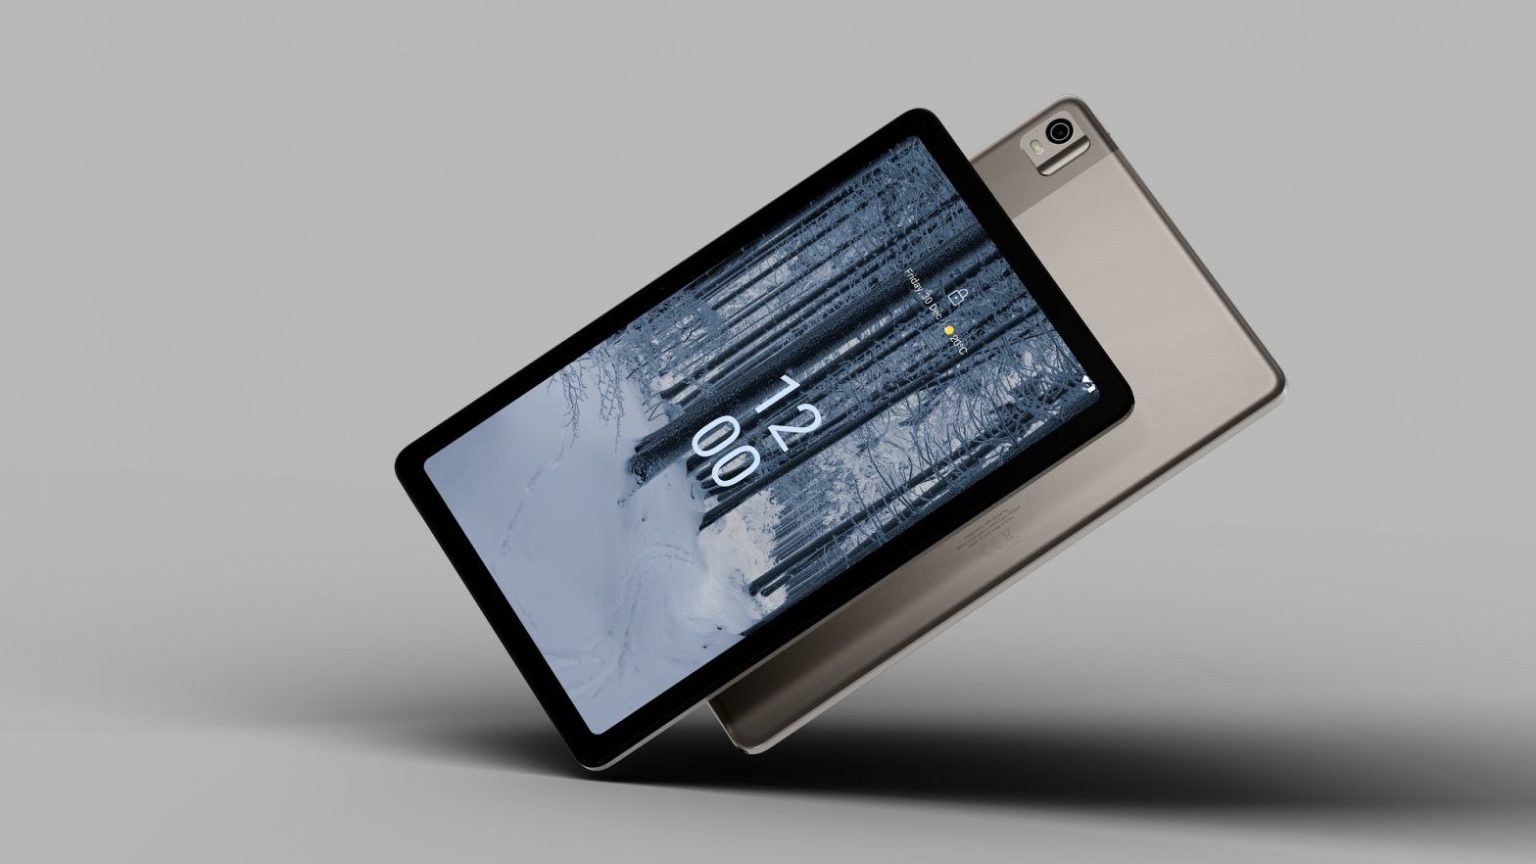 055db3183d 1536x864 - Nokia T21 tablet launched with a 2K display, 8,200mAh battery, and more